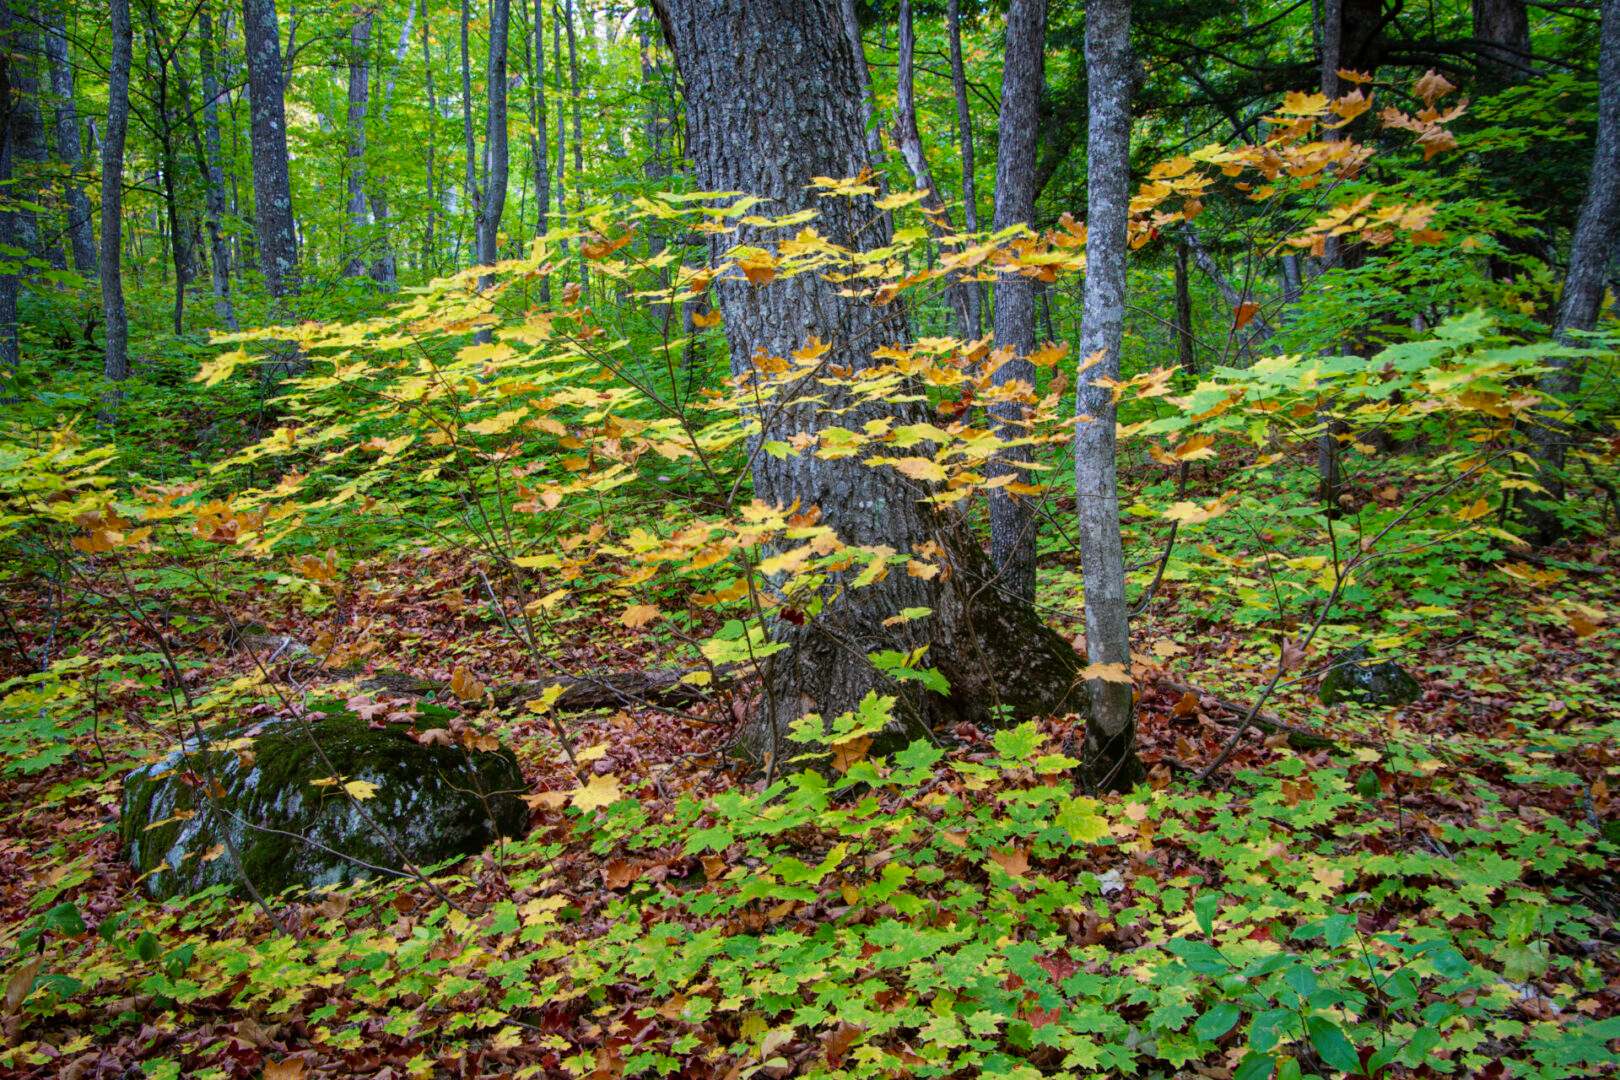 A forest with colorful leaves and a rock.